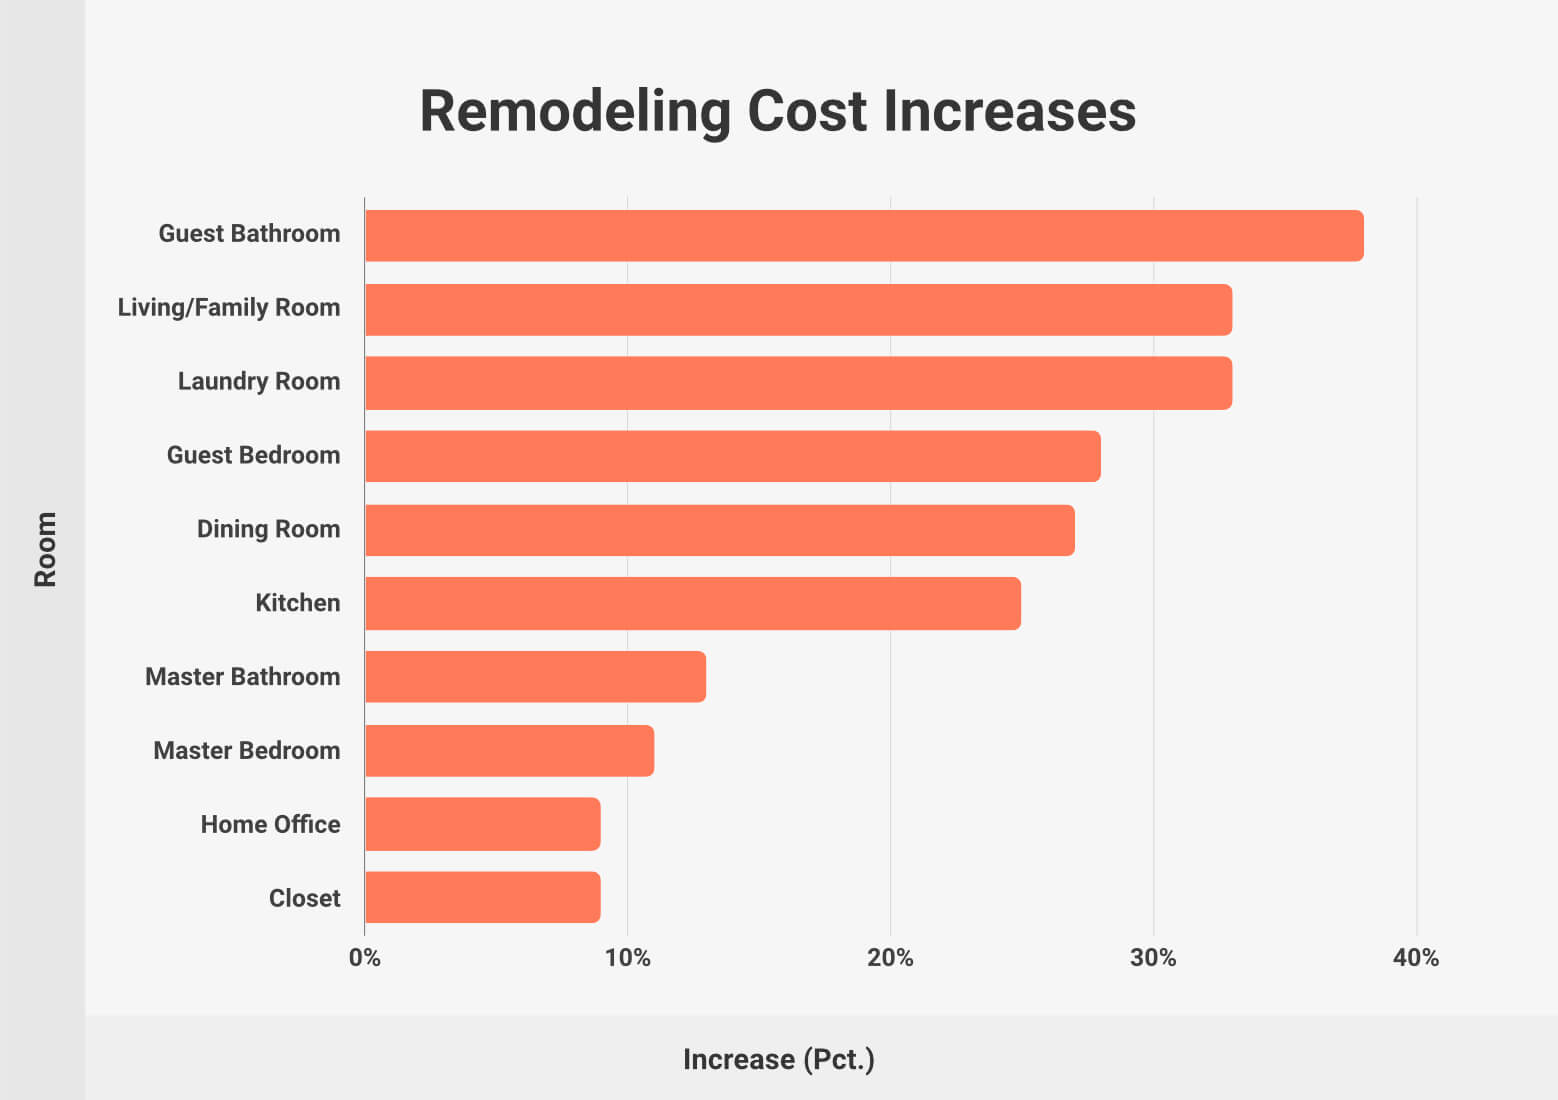 Remodeling Cost Increases